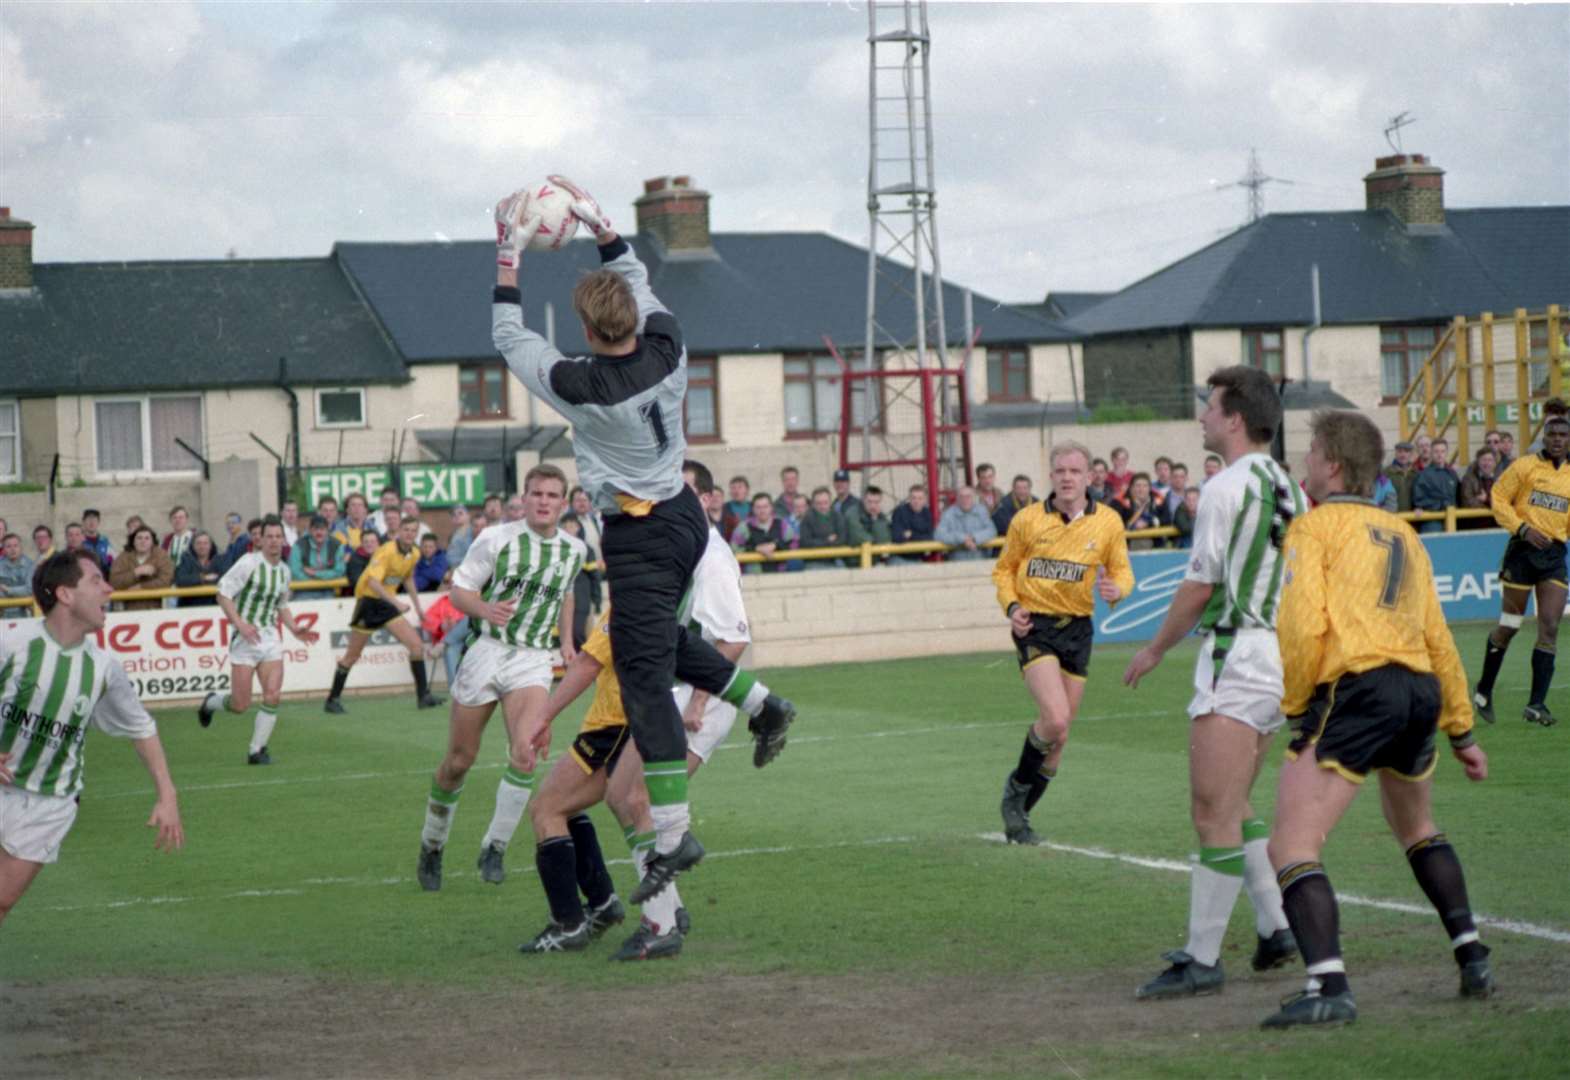 Maidstone's final 'home' game as a Football League club was a goalless draw against Mansfield at Dartford's Watling Street ground in April 1992